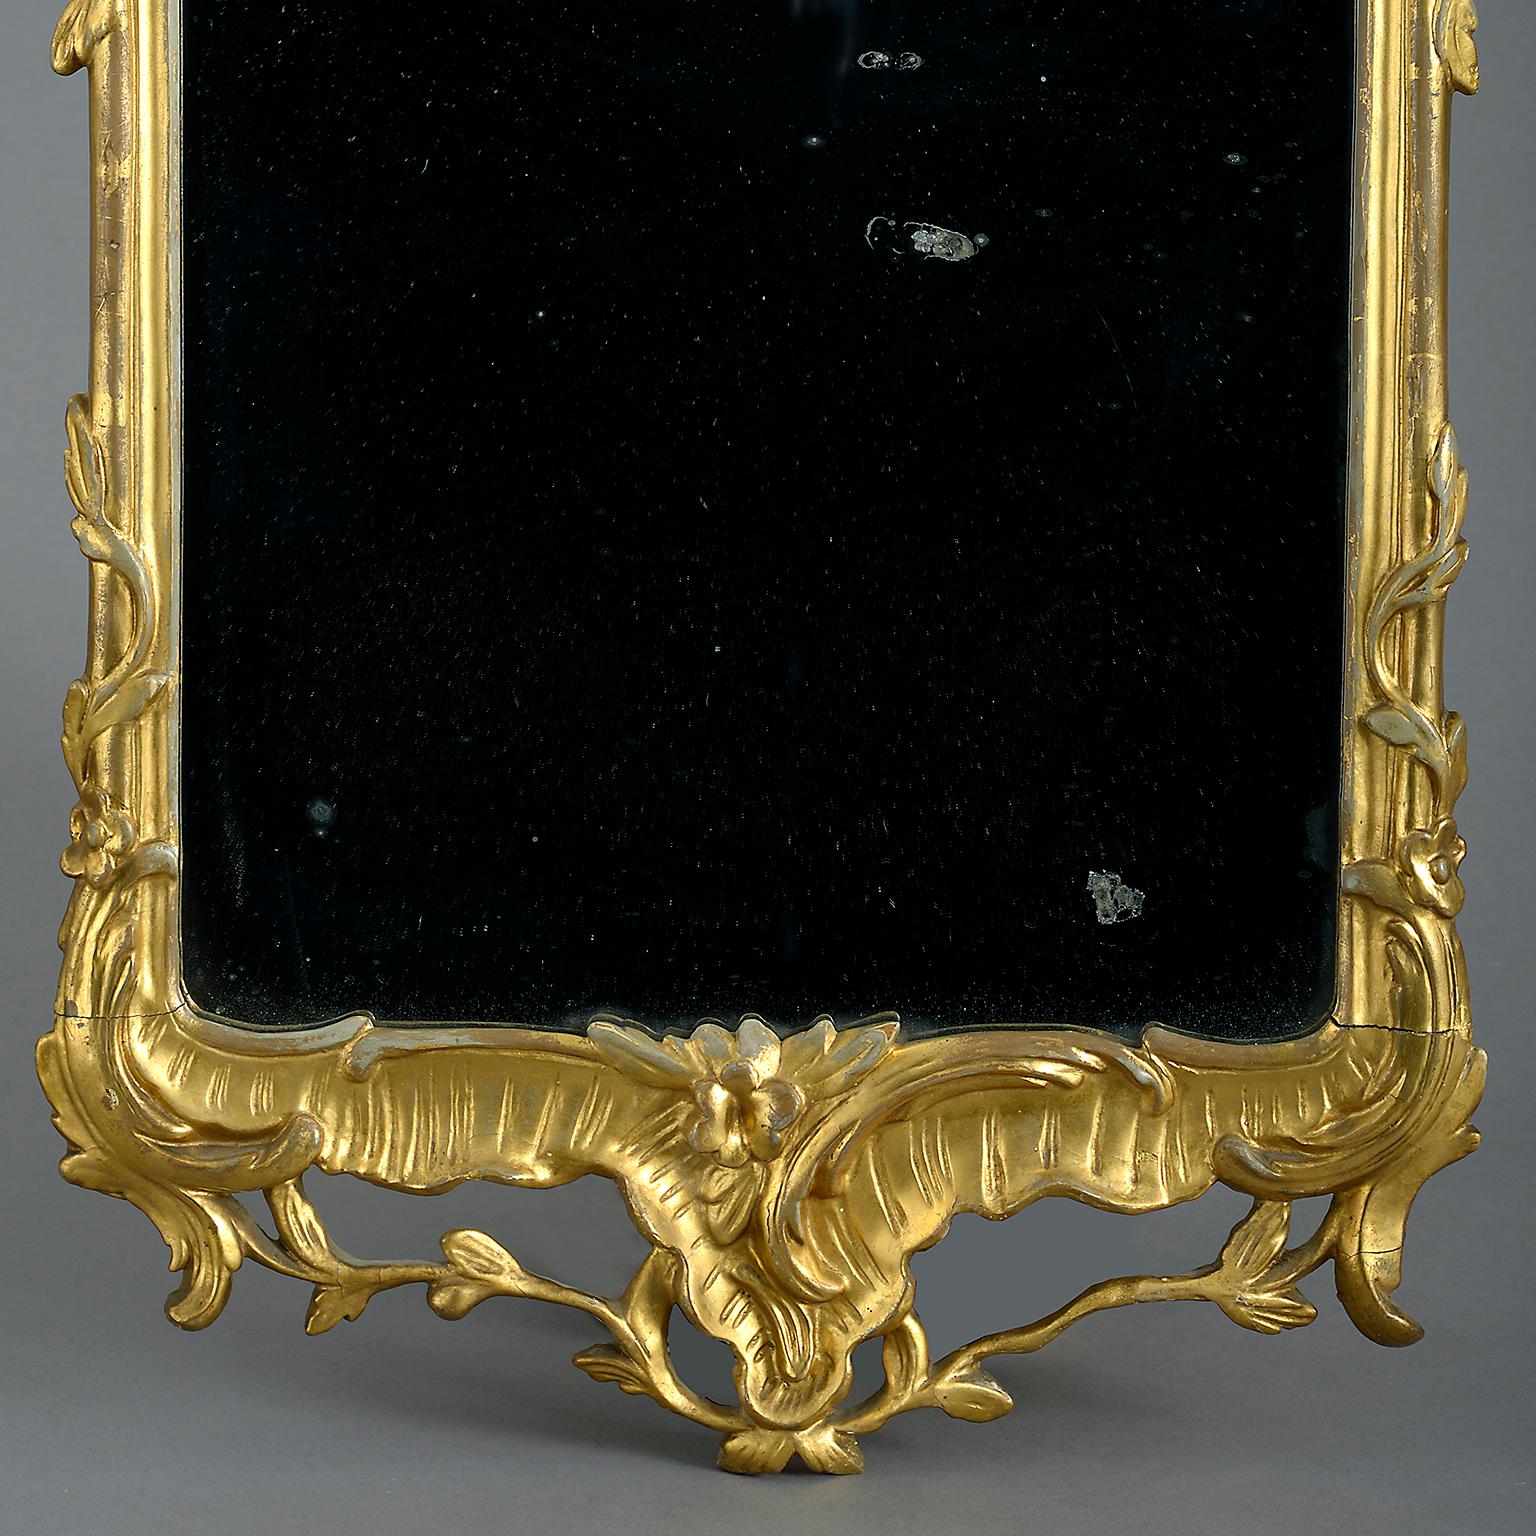 German Mid-18th Century Rococo Giltwood Mirror in the Manner of Hoppenhaupt For Sale